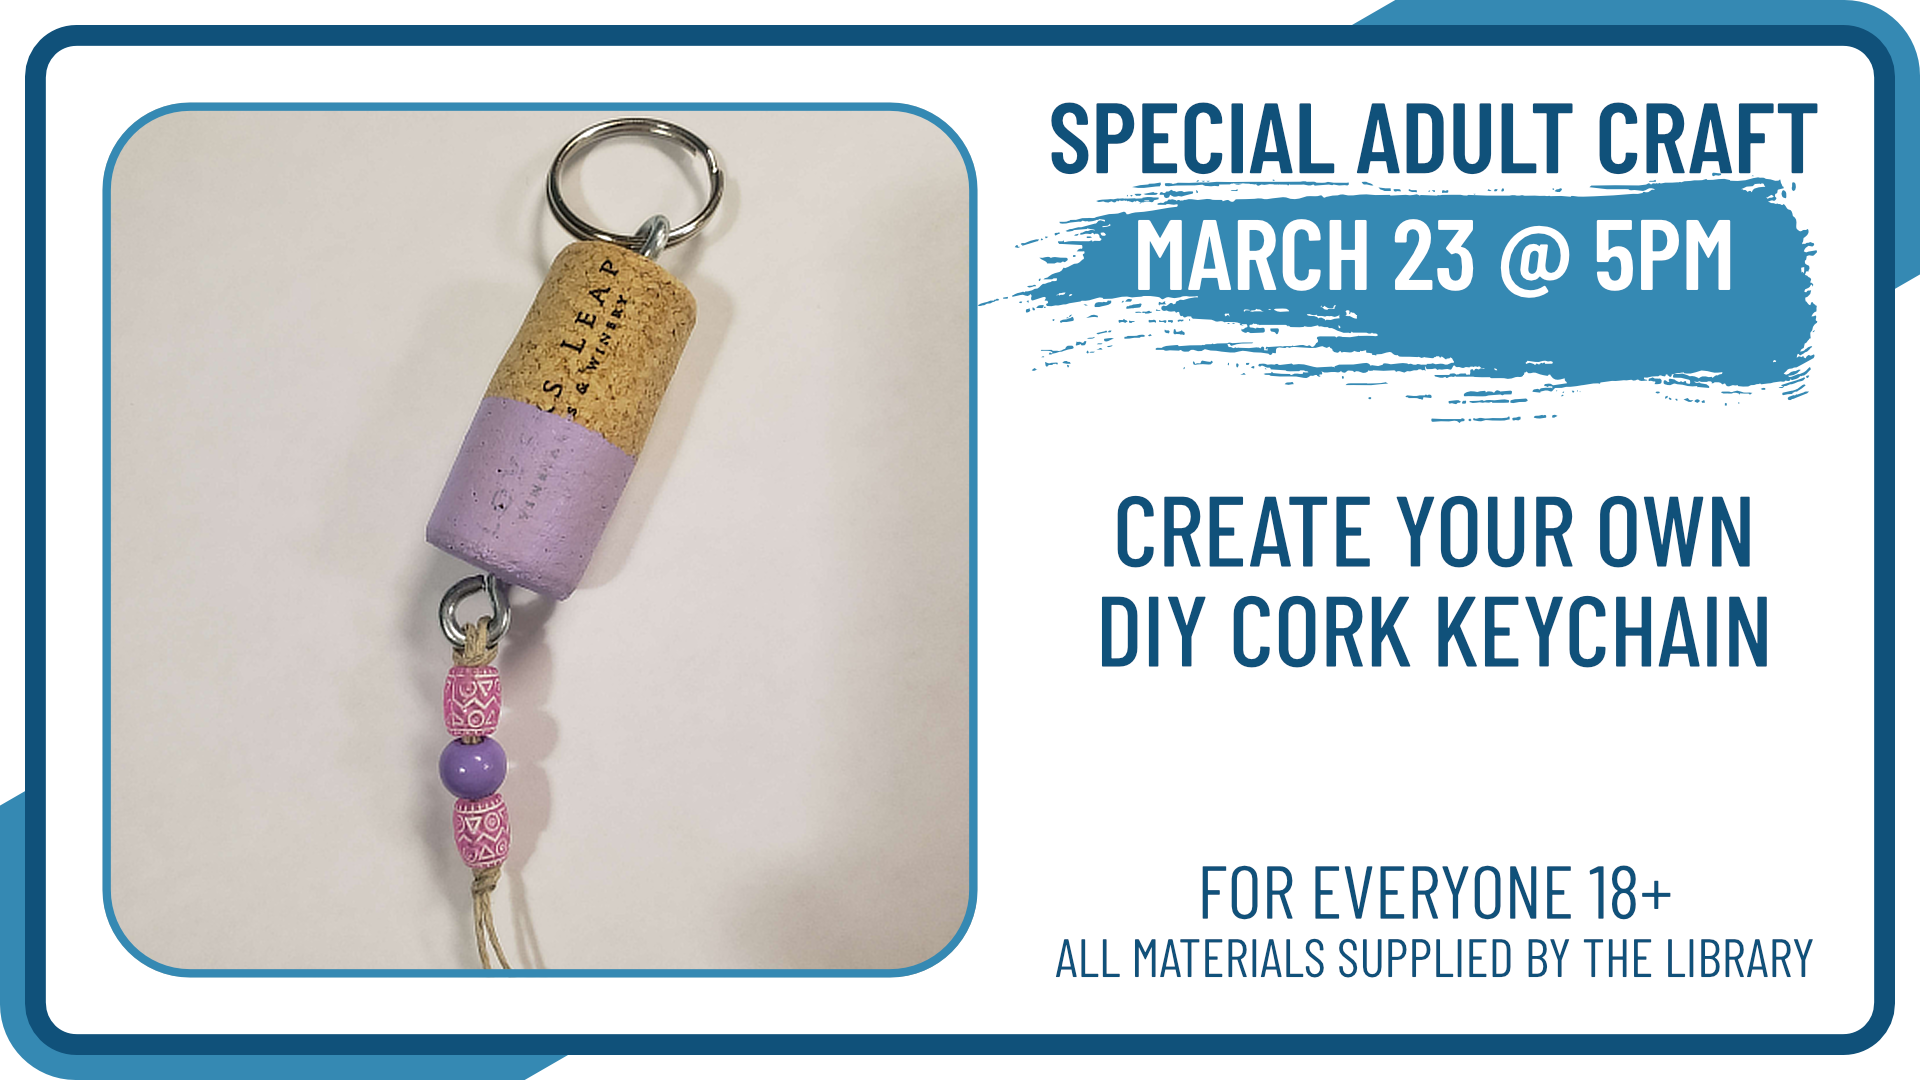 DIY Wine Cork Keychains, March 23rd at 5pm, intended for adults 18+